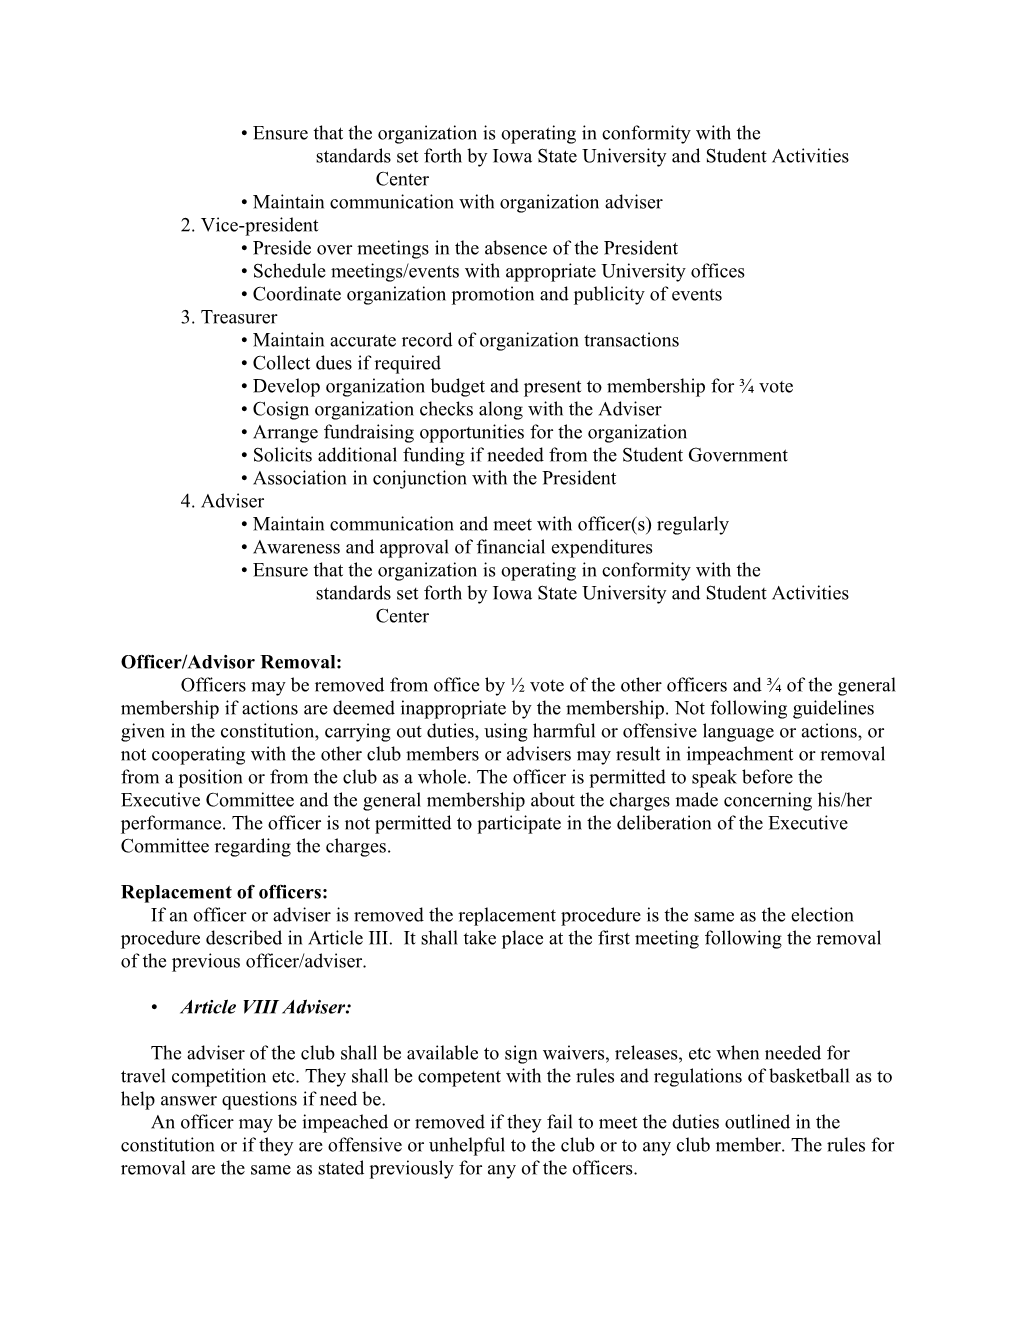 Iowa State University Women S Basketball Club Official Constitution